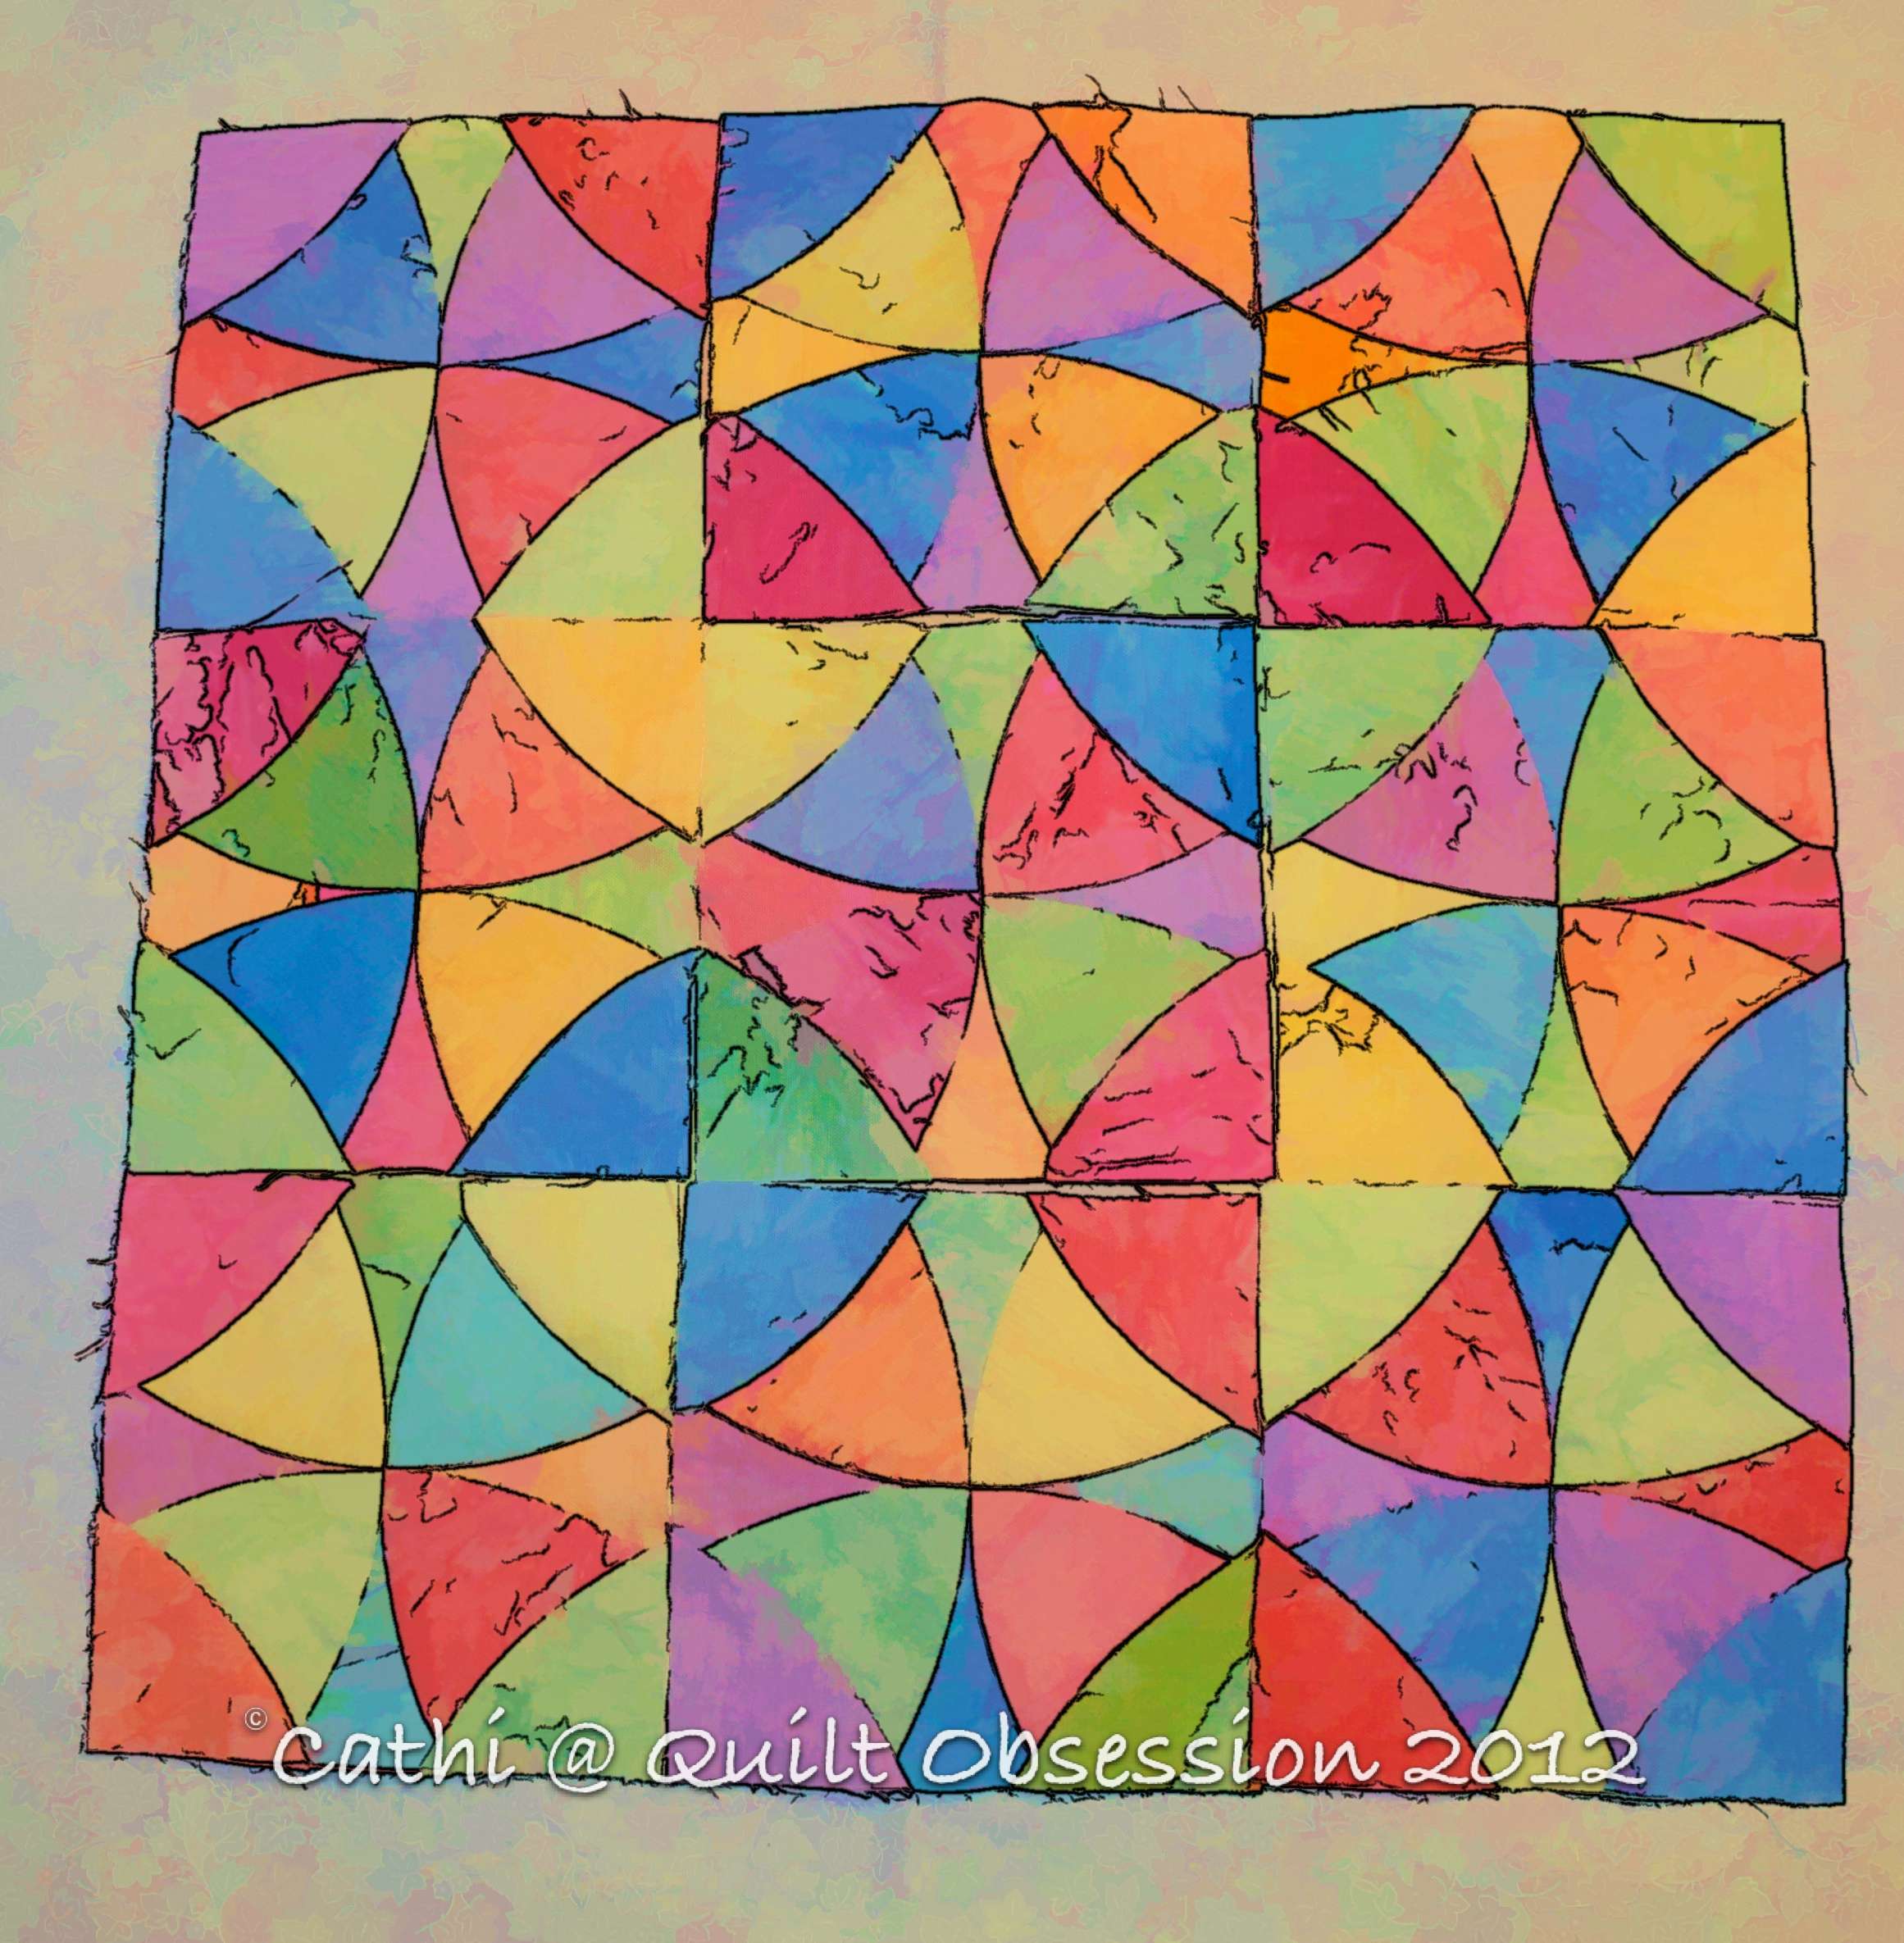 free clipart images quilts - photo #44